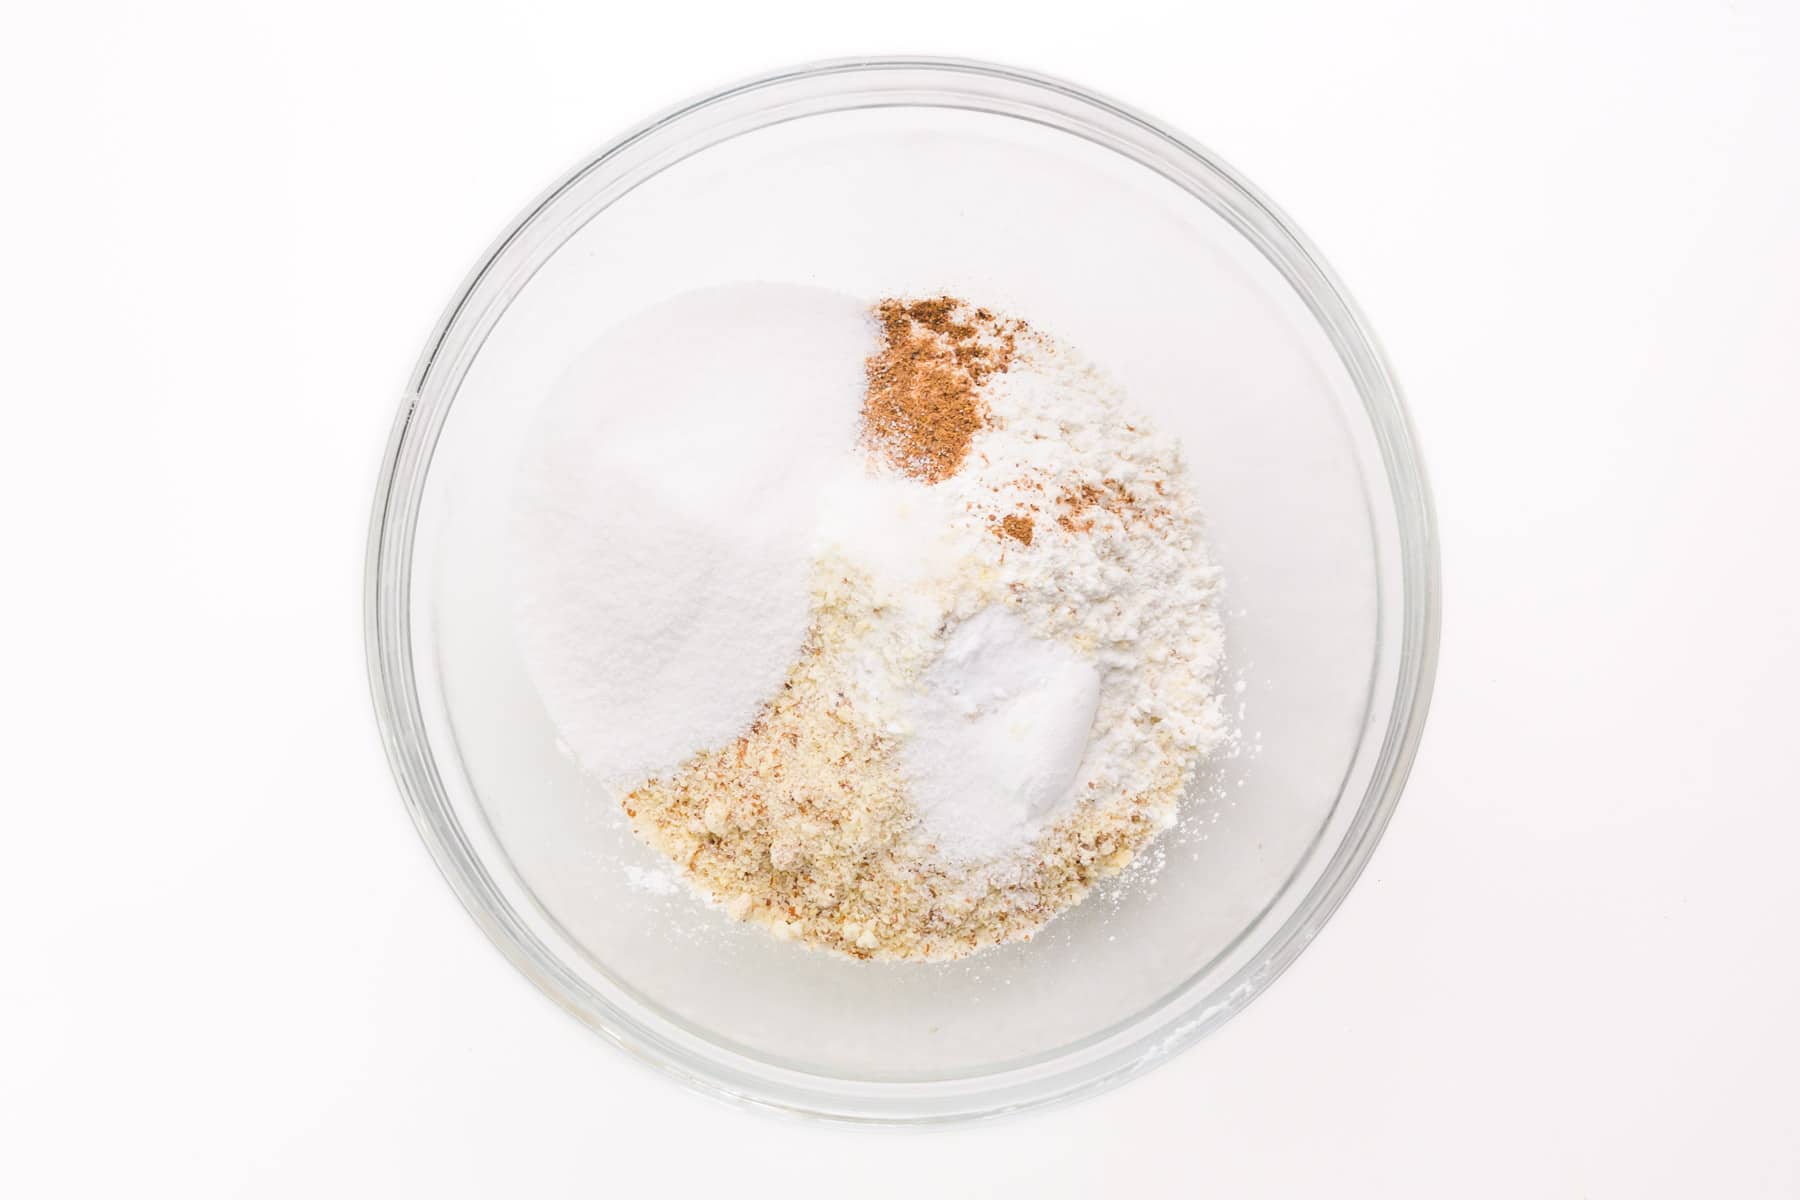 Dry ingredients to make donuts are in the bottom of a bowl.